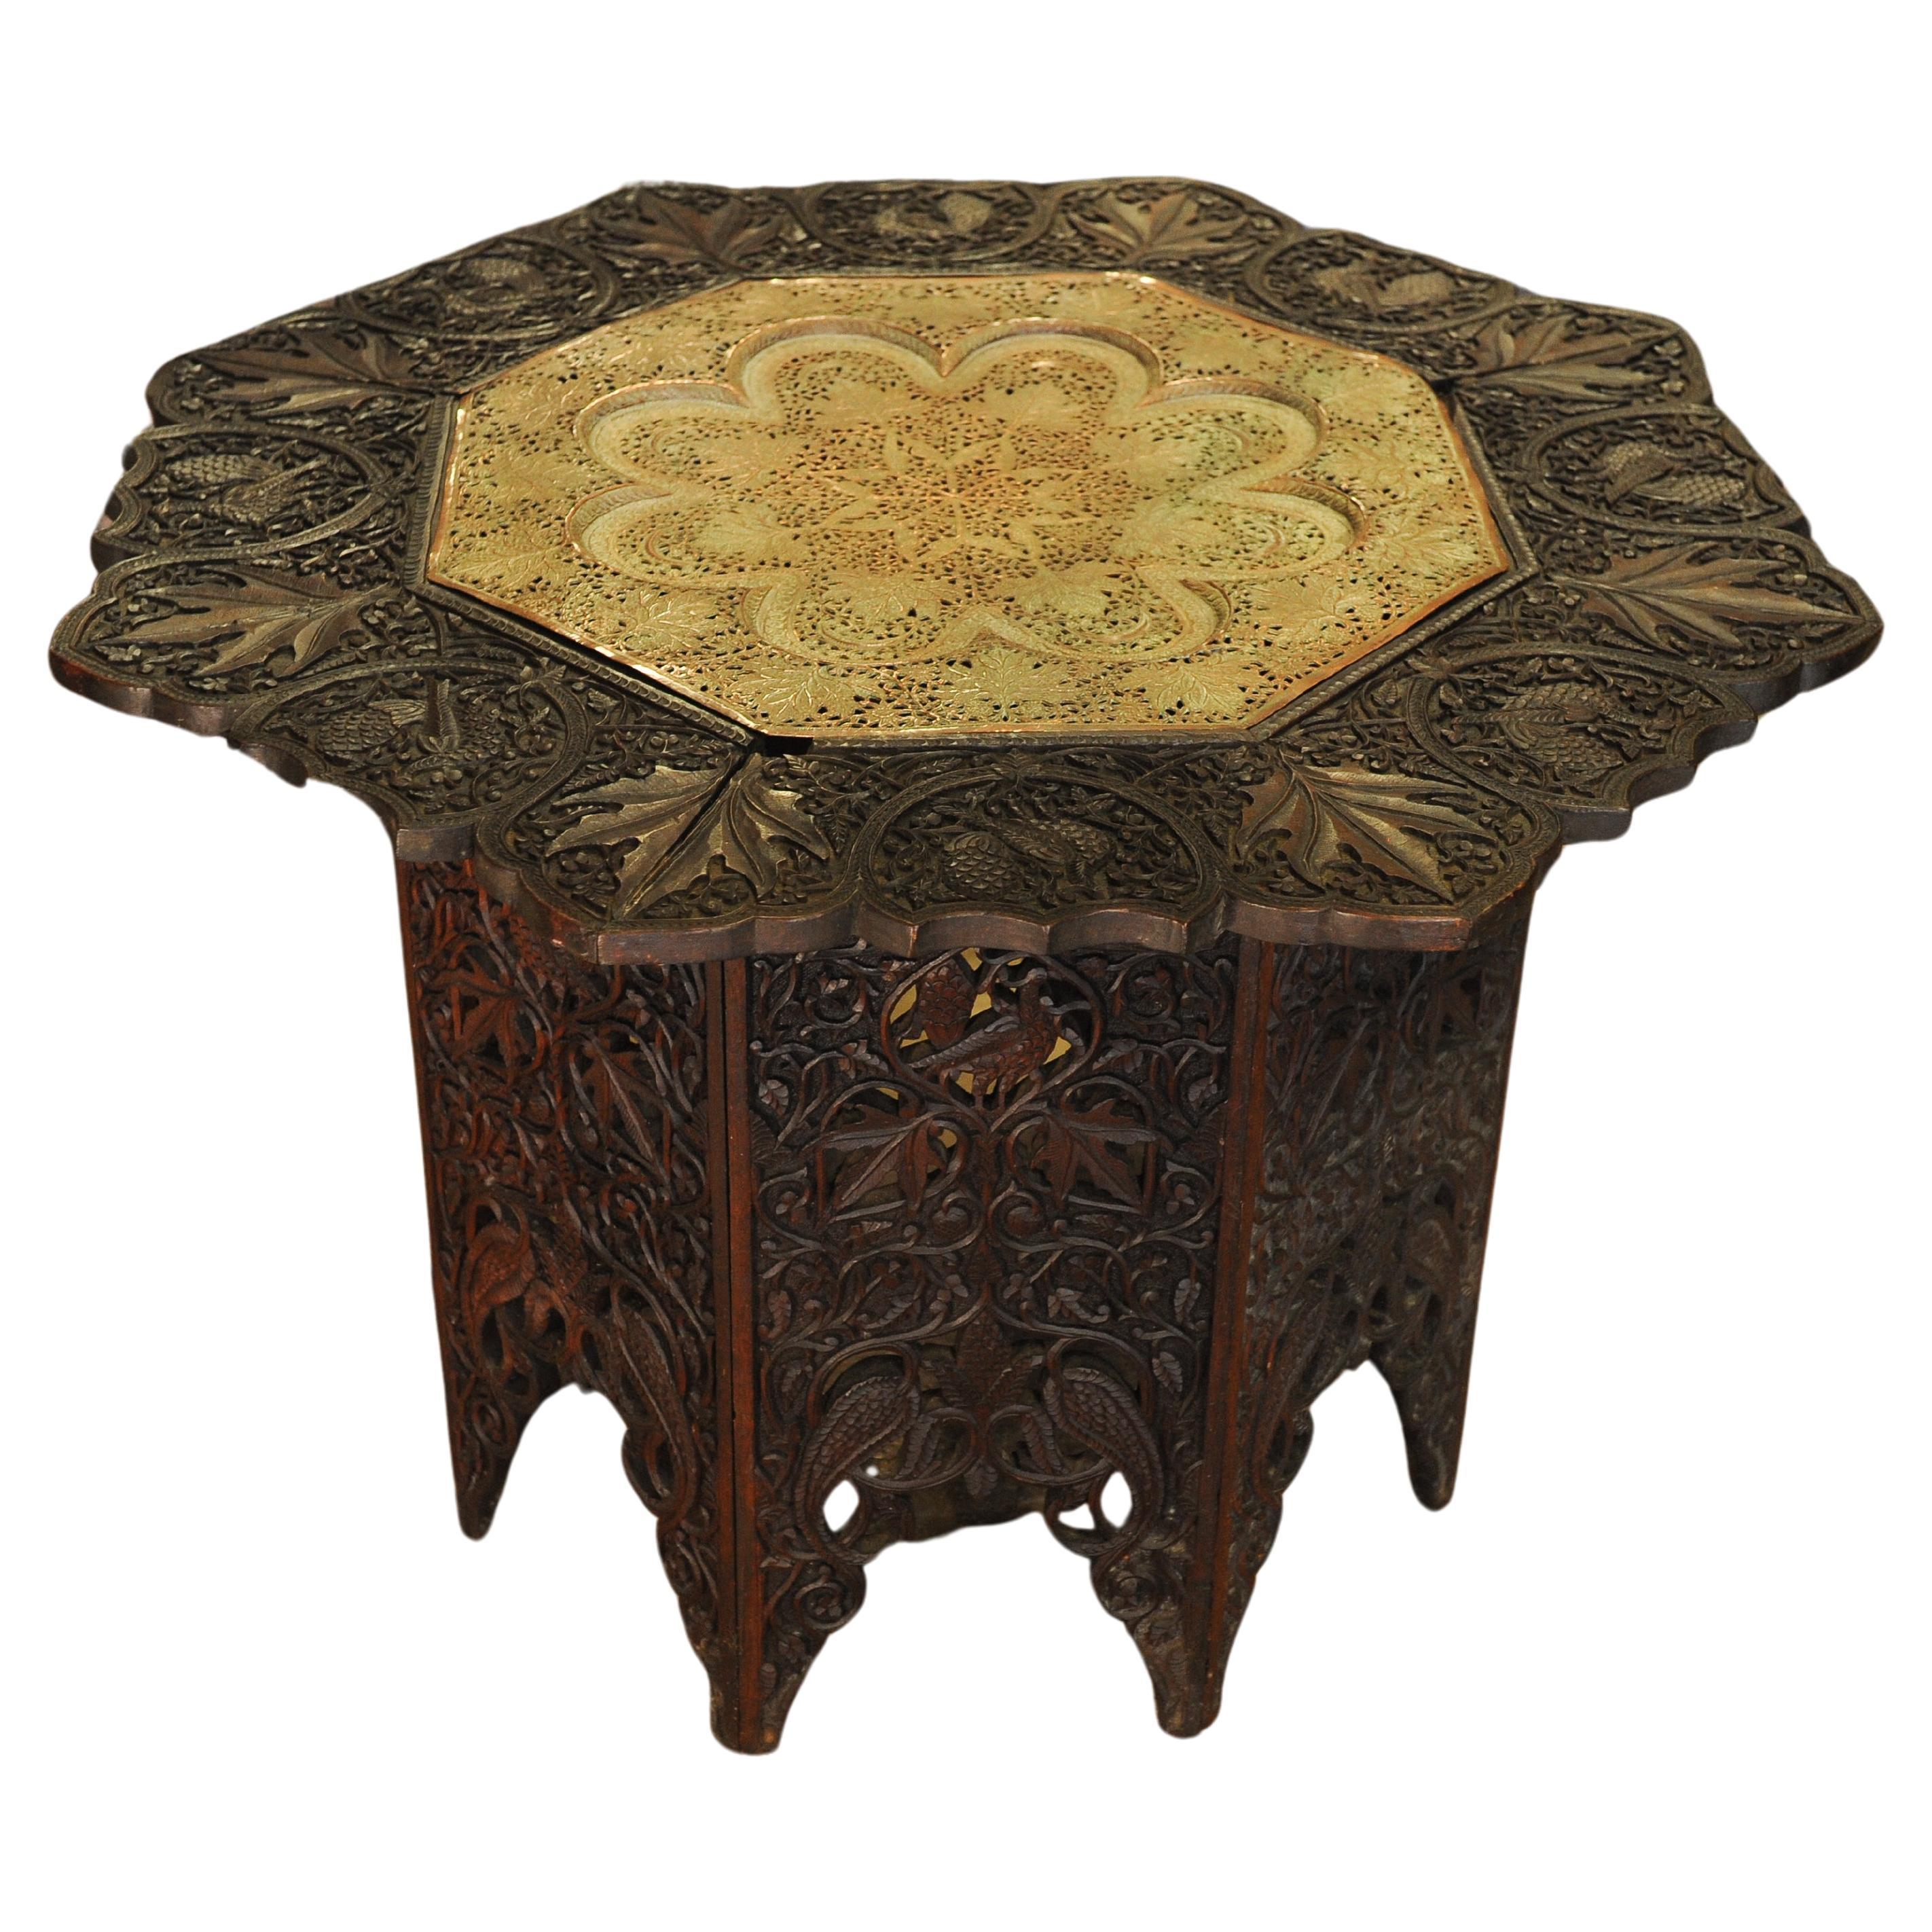 Asian octagonal occasional table on folding base, with brass insert and all-over carved and pierced decoration.
Intricately carved with nature inspired elements: leaves, birds, trees

Table base folds and table top, and brass insert lifts off all